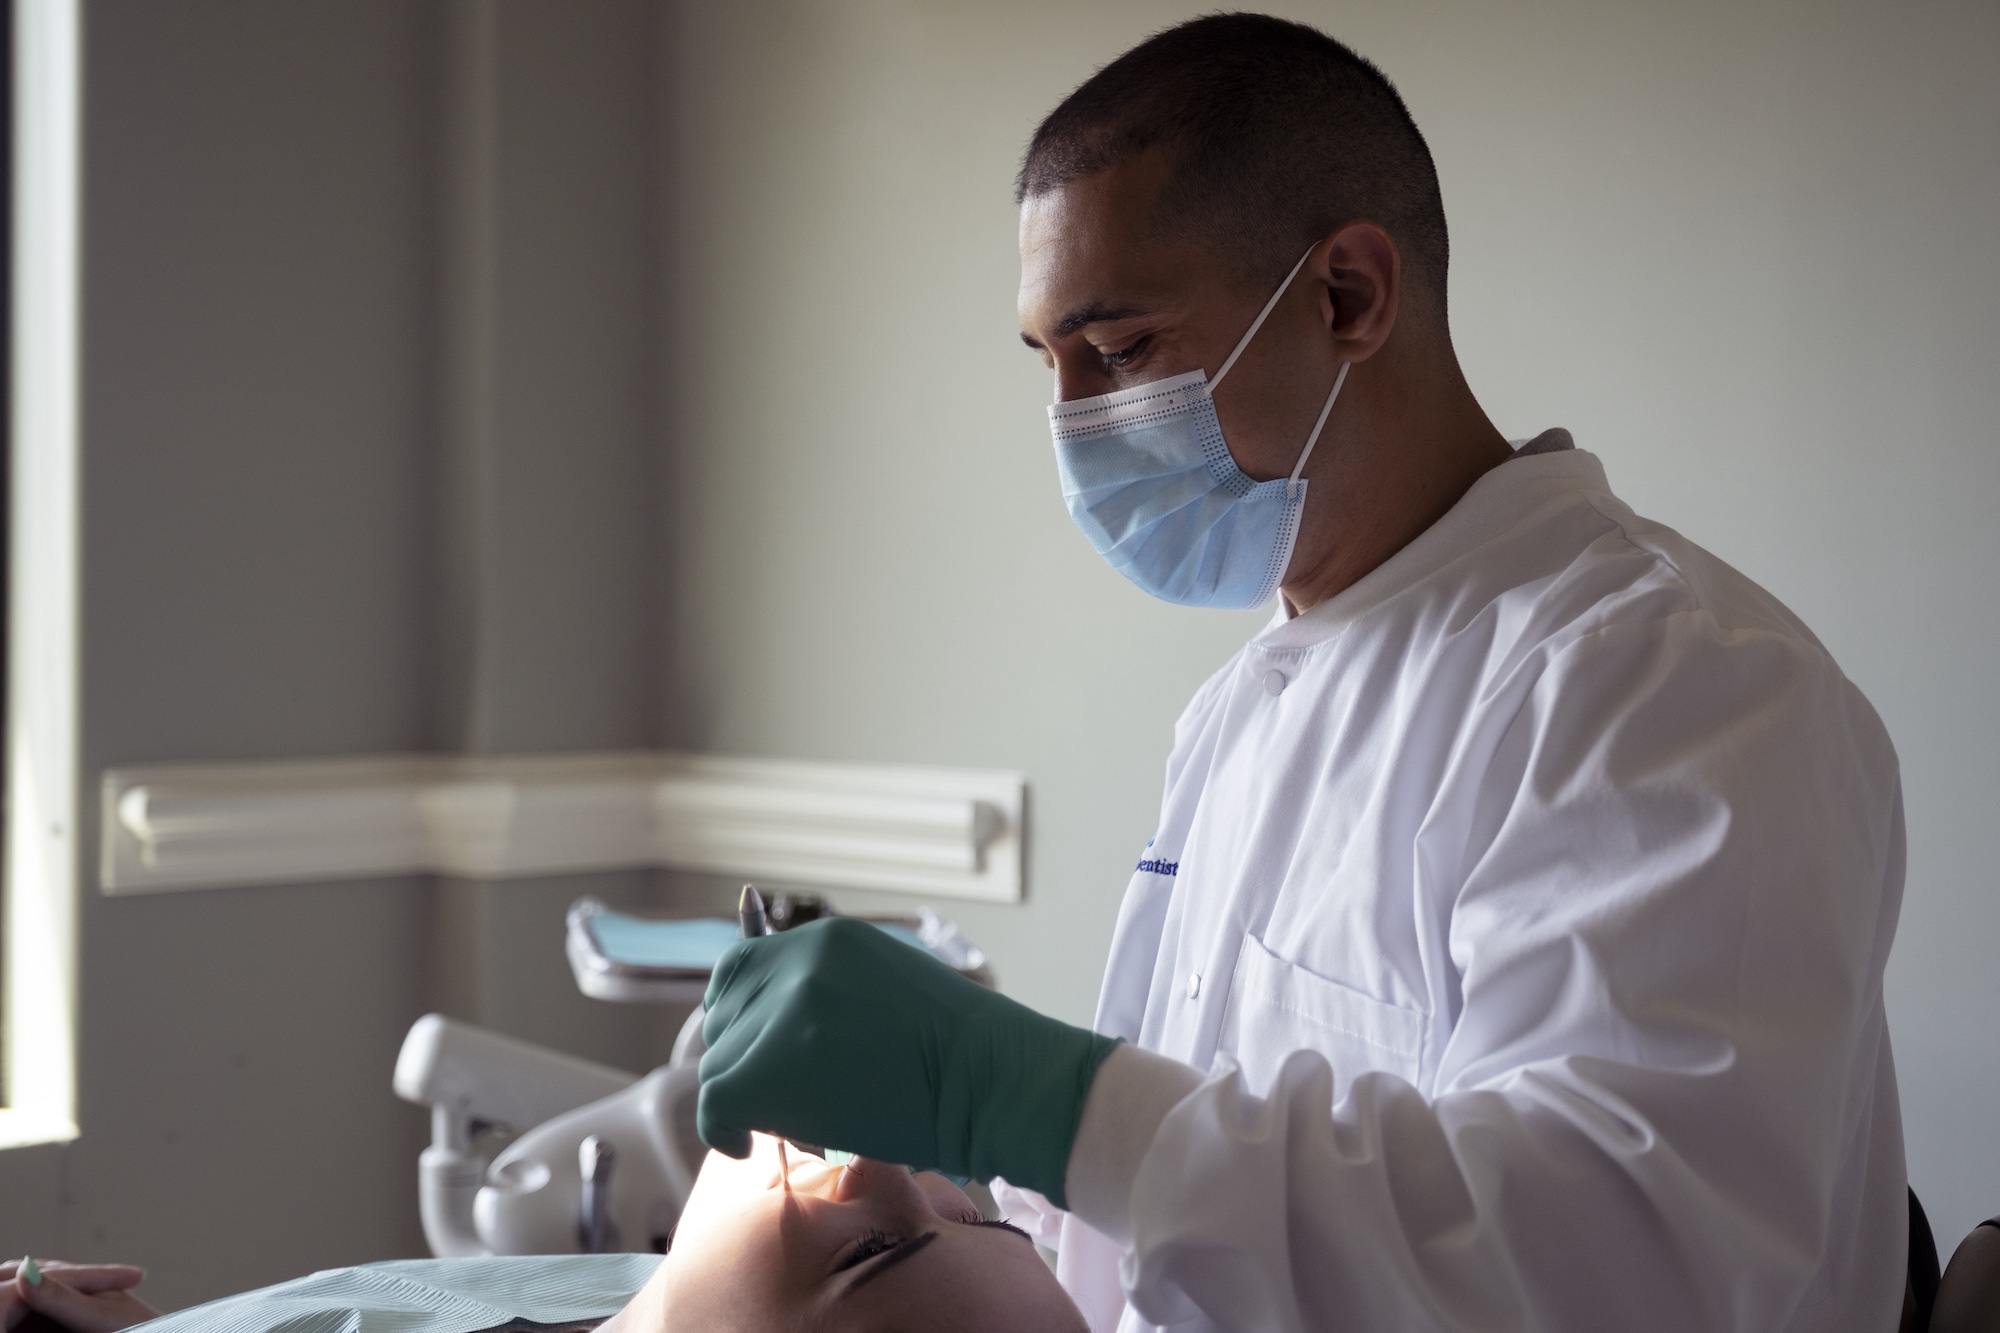 Dentist working on patient in operatory